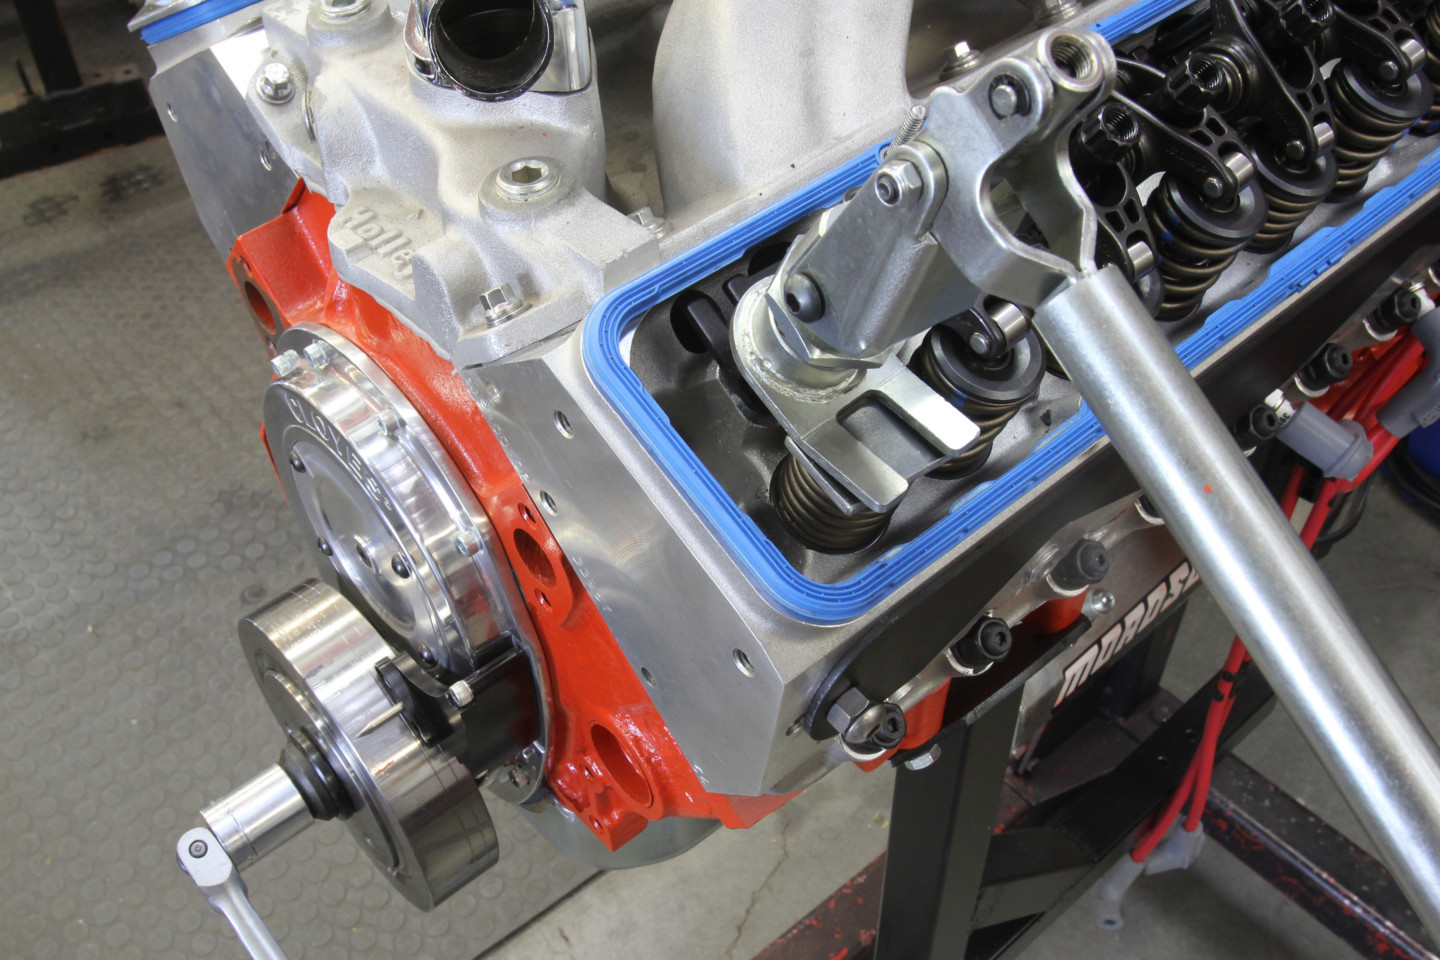 Engine Labs: Featured Article! "'What I Learned Today' with Jeff Smith- Improvising a Piston Stop